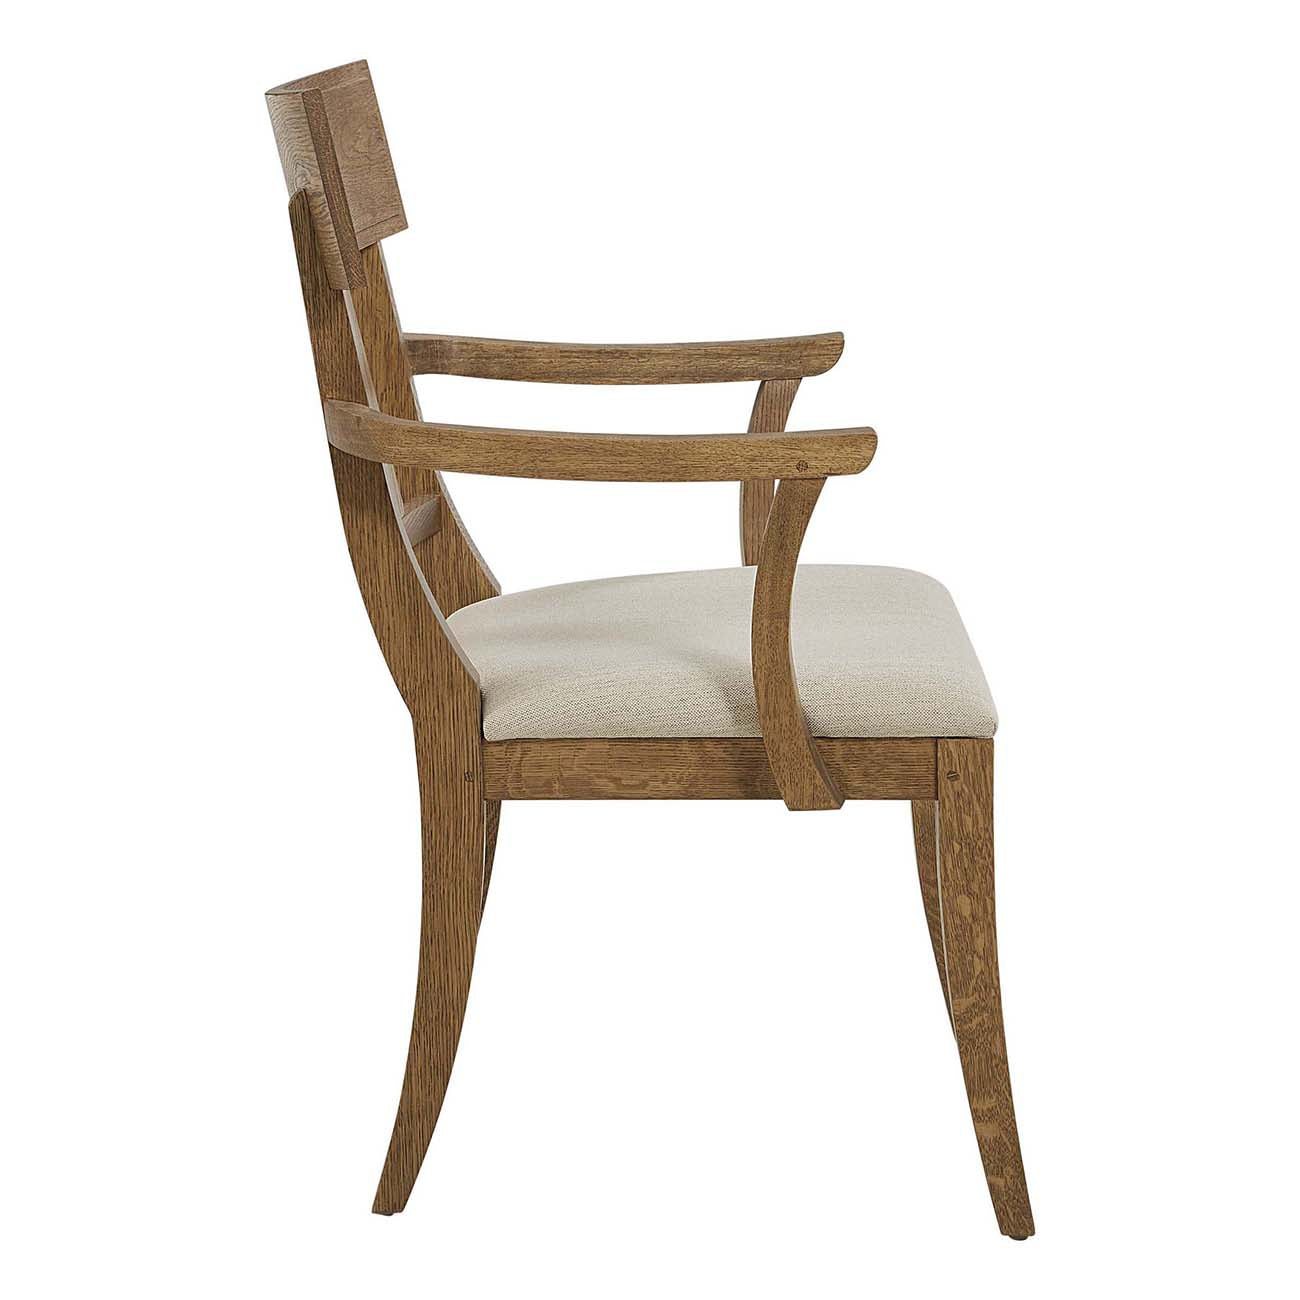 St. Lawrence Curved Arm Chair - Stickley Brand